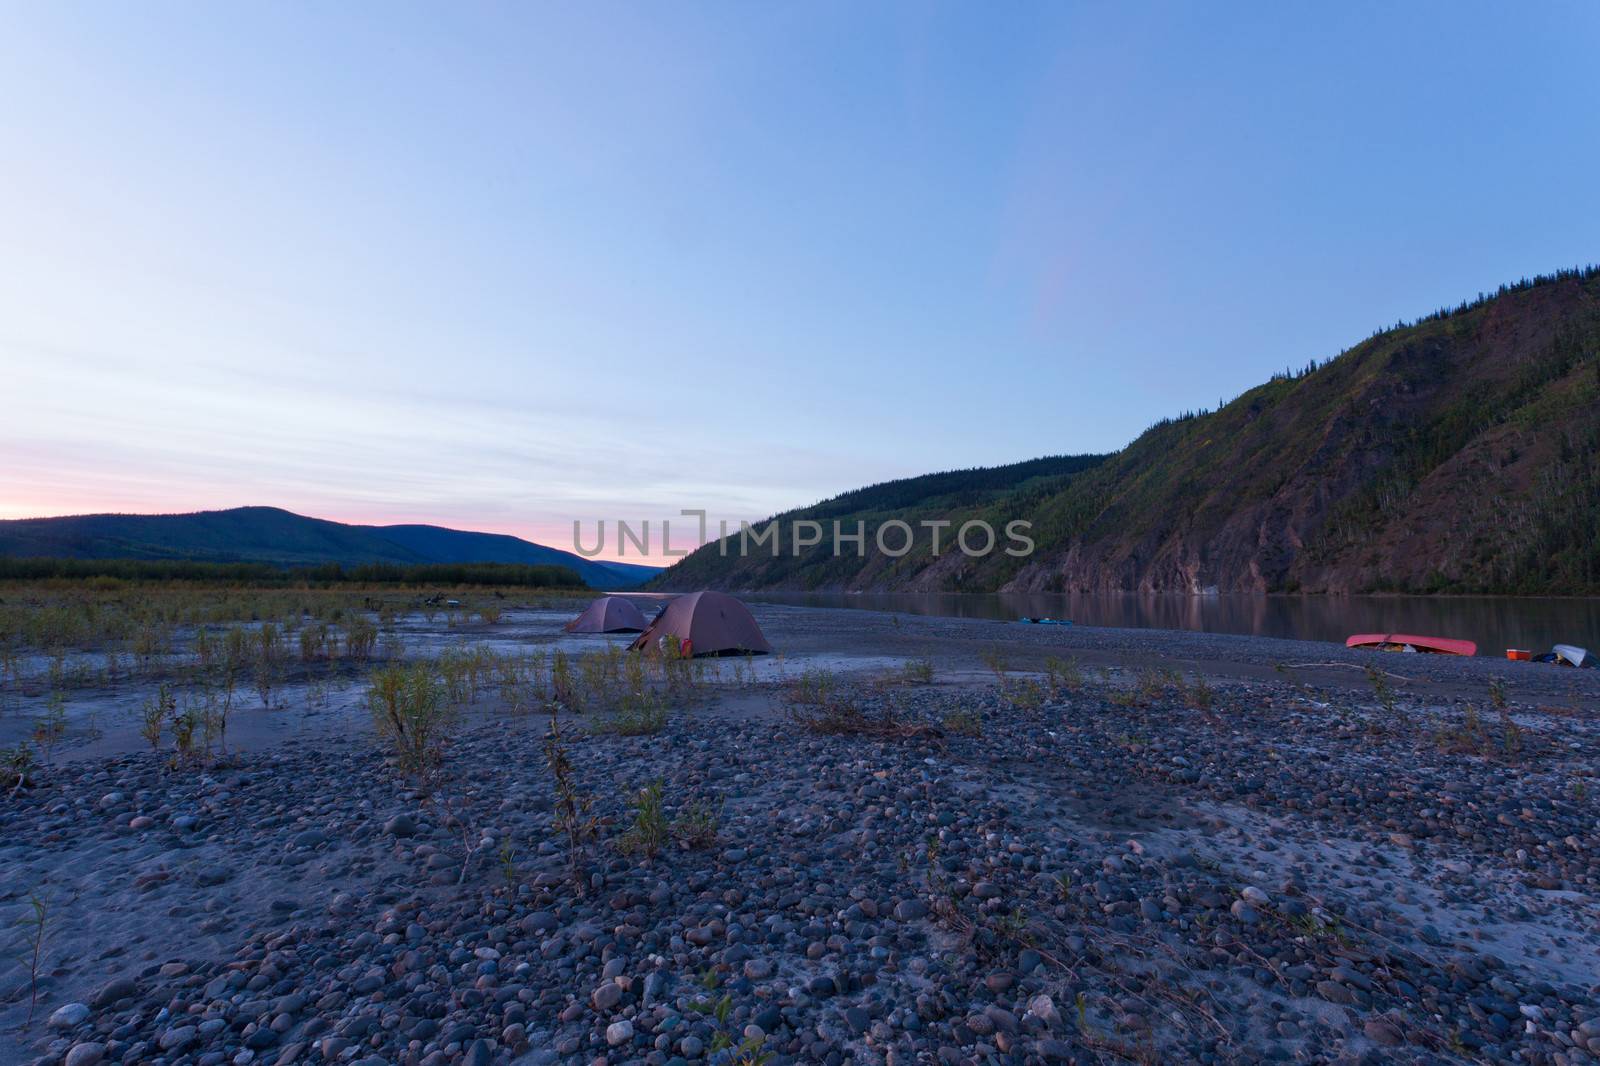 Midsummer night tent camp and beached canoes on Yukon River, Yukon Territory, Canada, in remote boreal forest wilderness